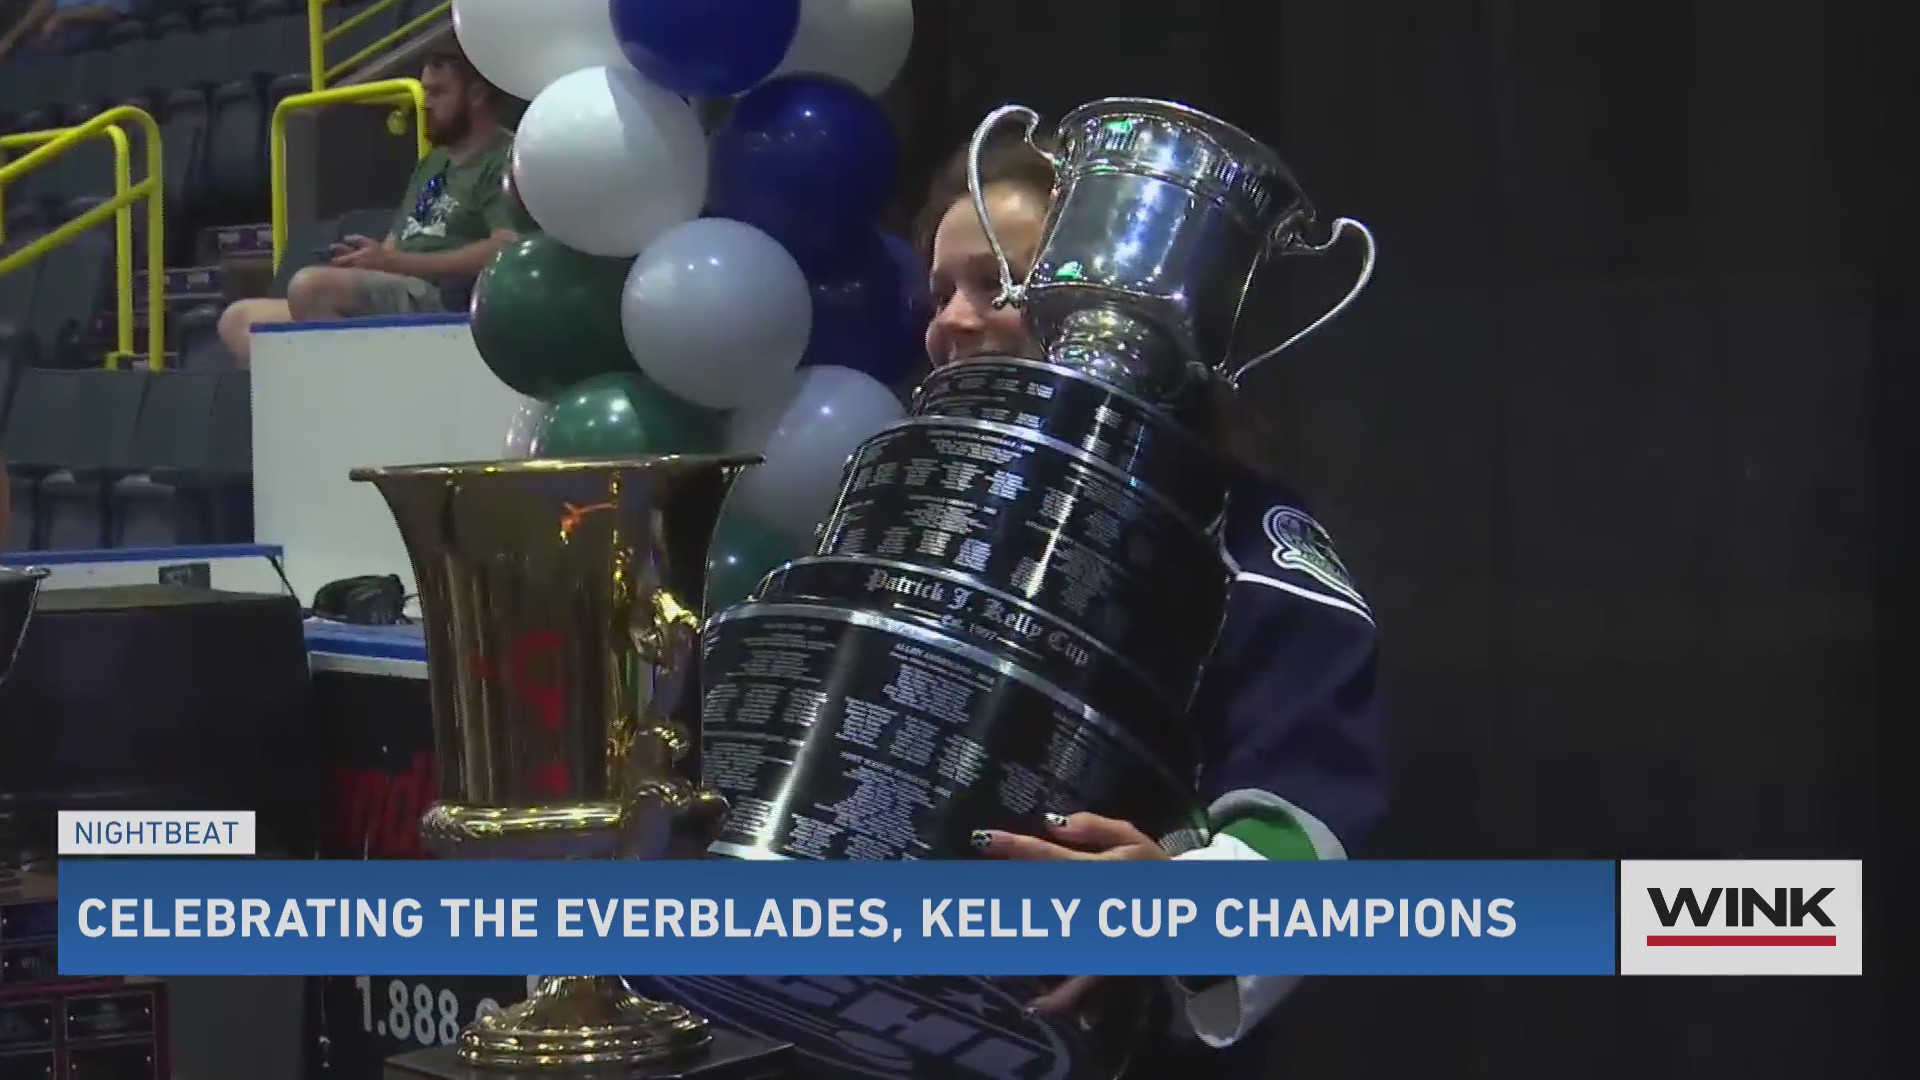 Fans celebrate Everblades Kelly Cup championship at Hertz Arena